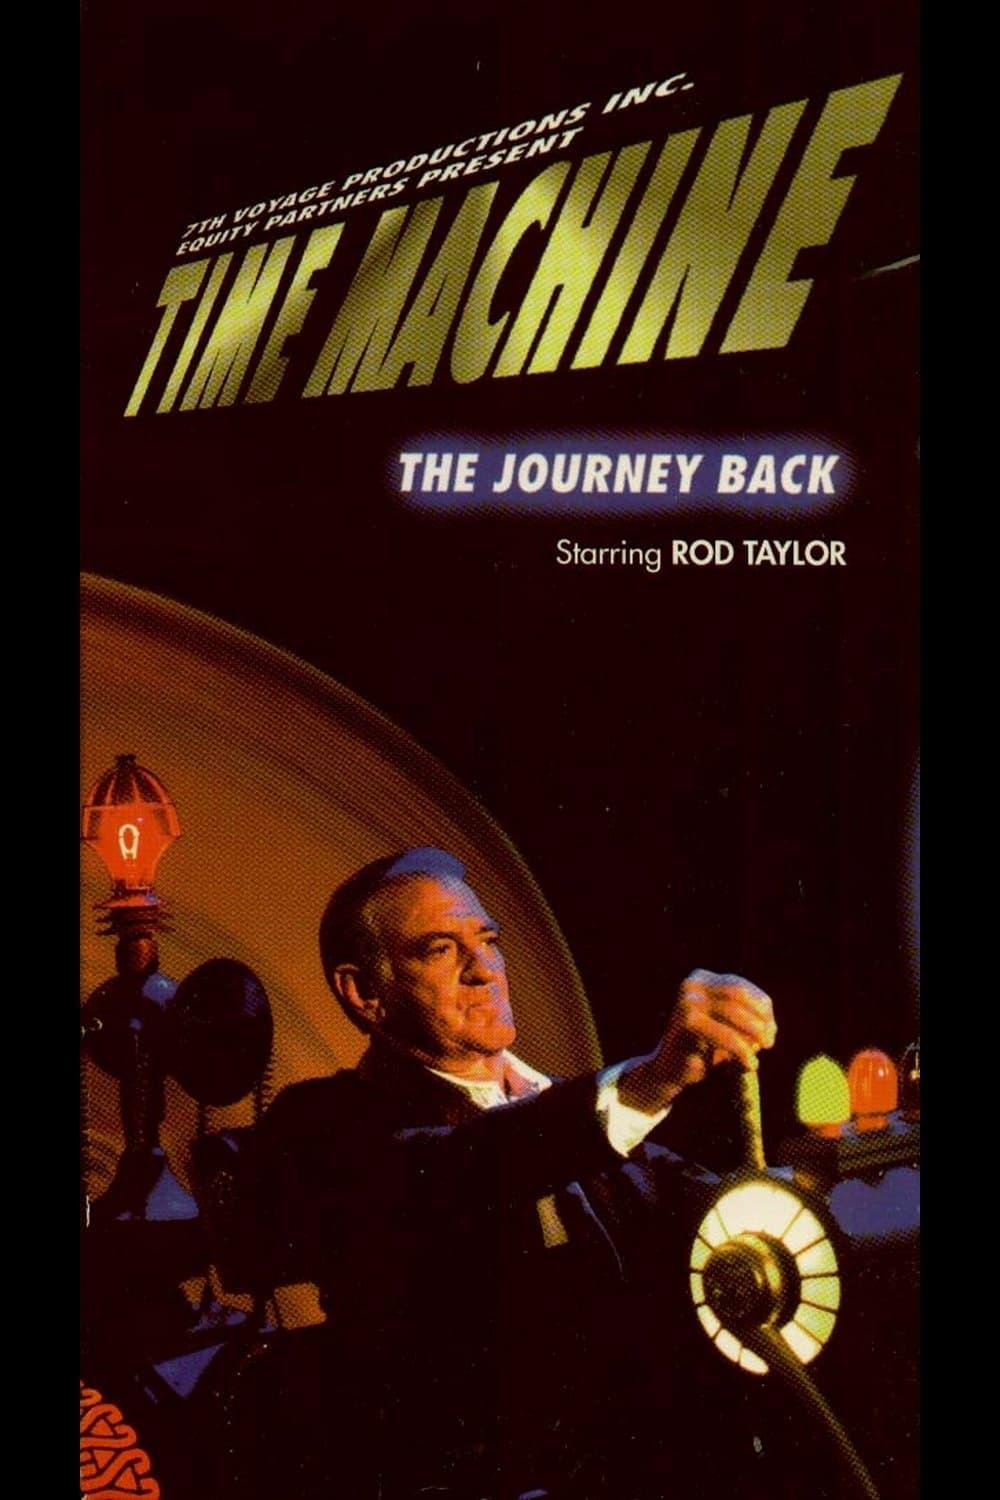 Time Machine: The Journey Back poster